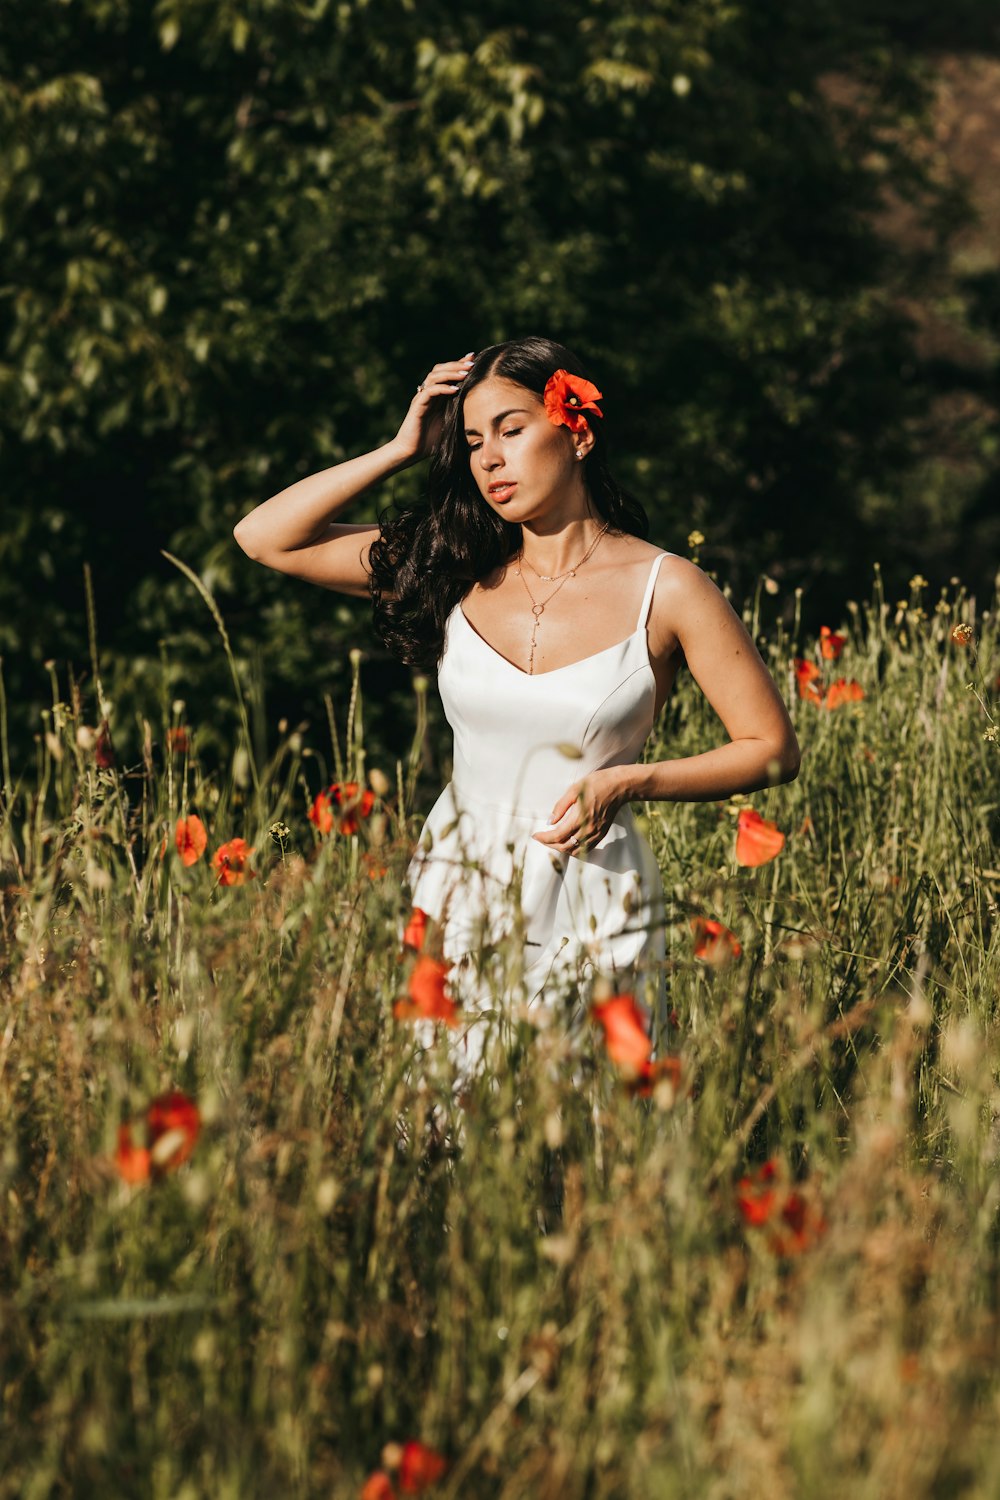 a person in a white dress standing in a field of flowers